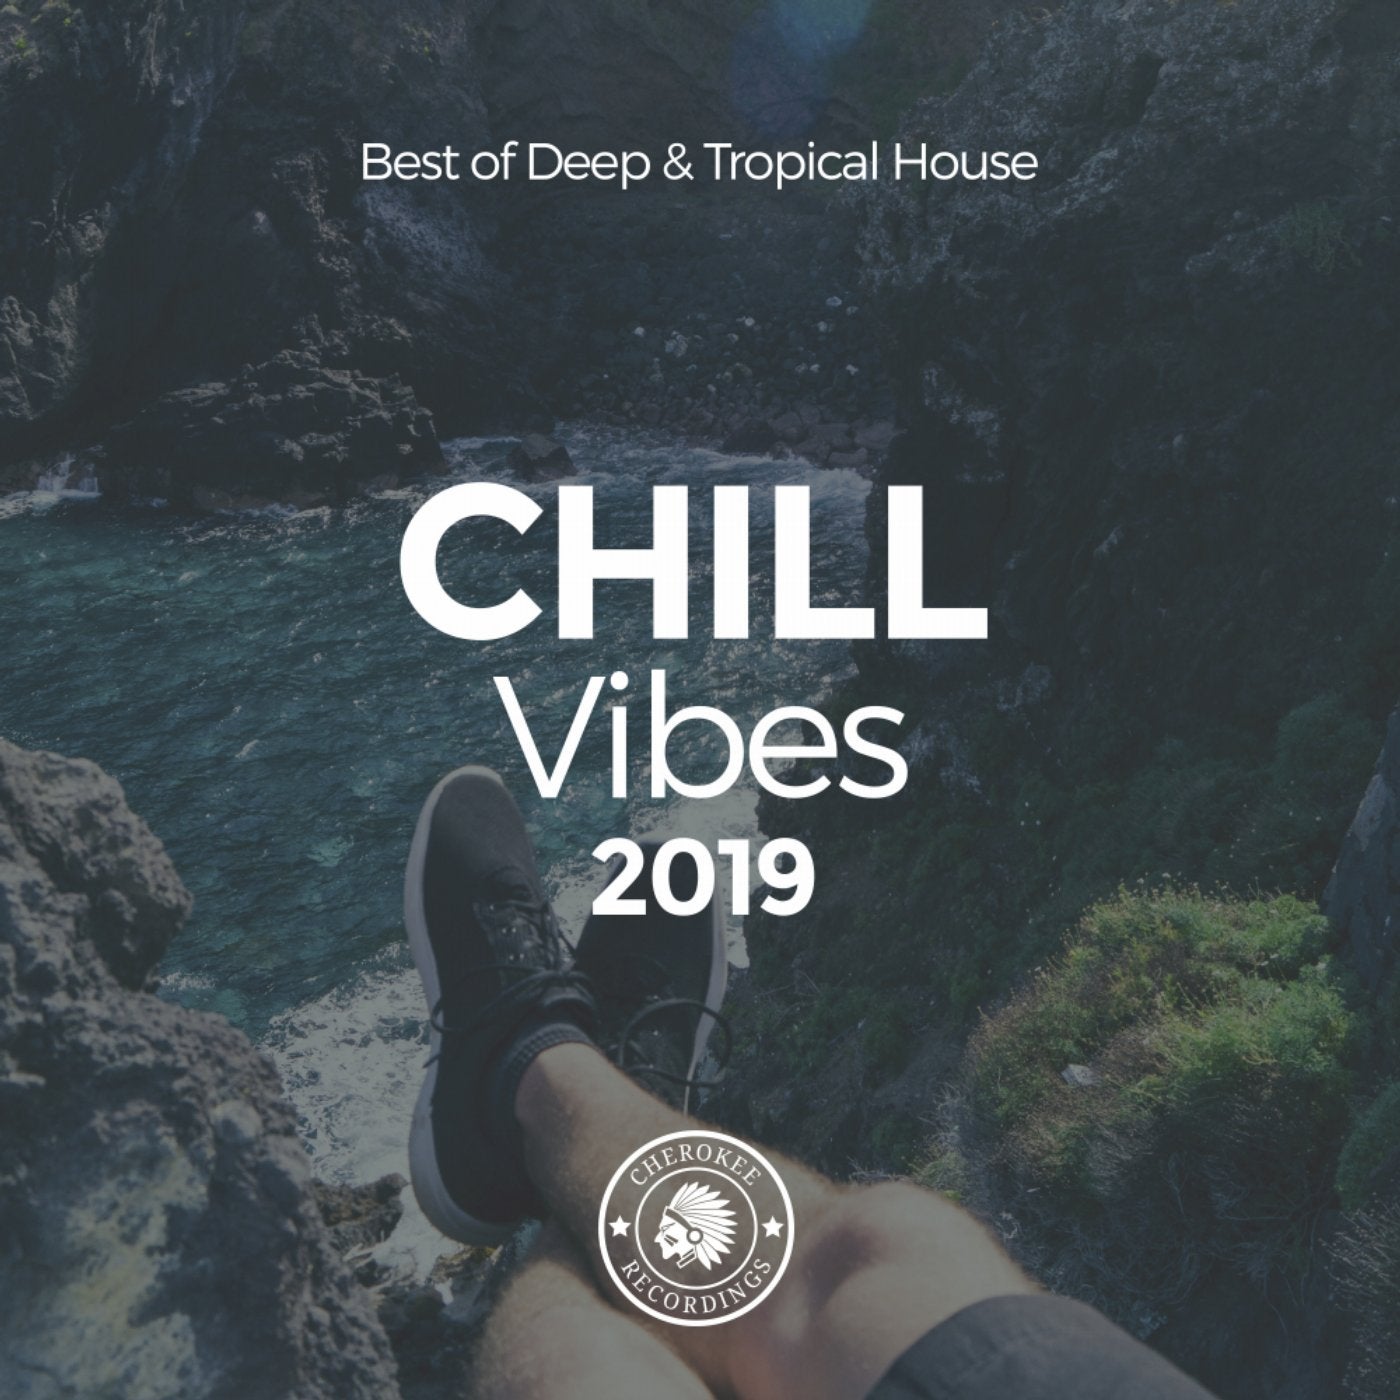 Chill Vibes 2019: Best of Deep & Tropical House